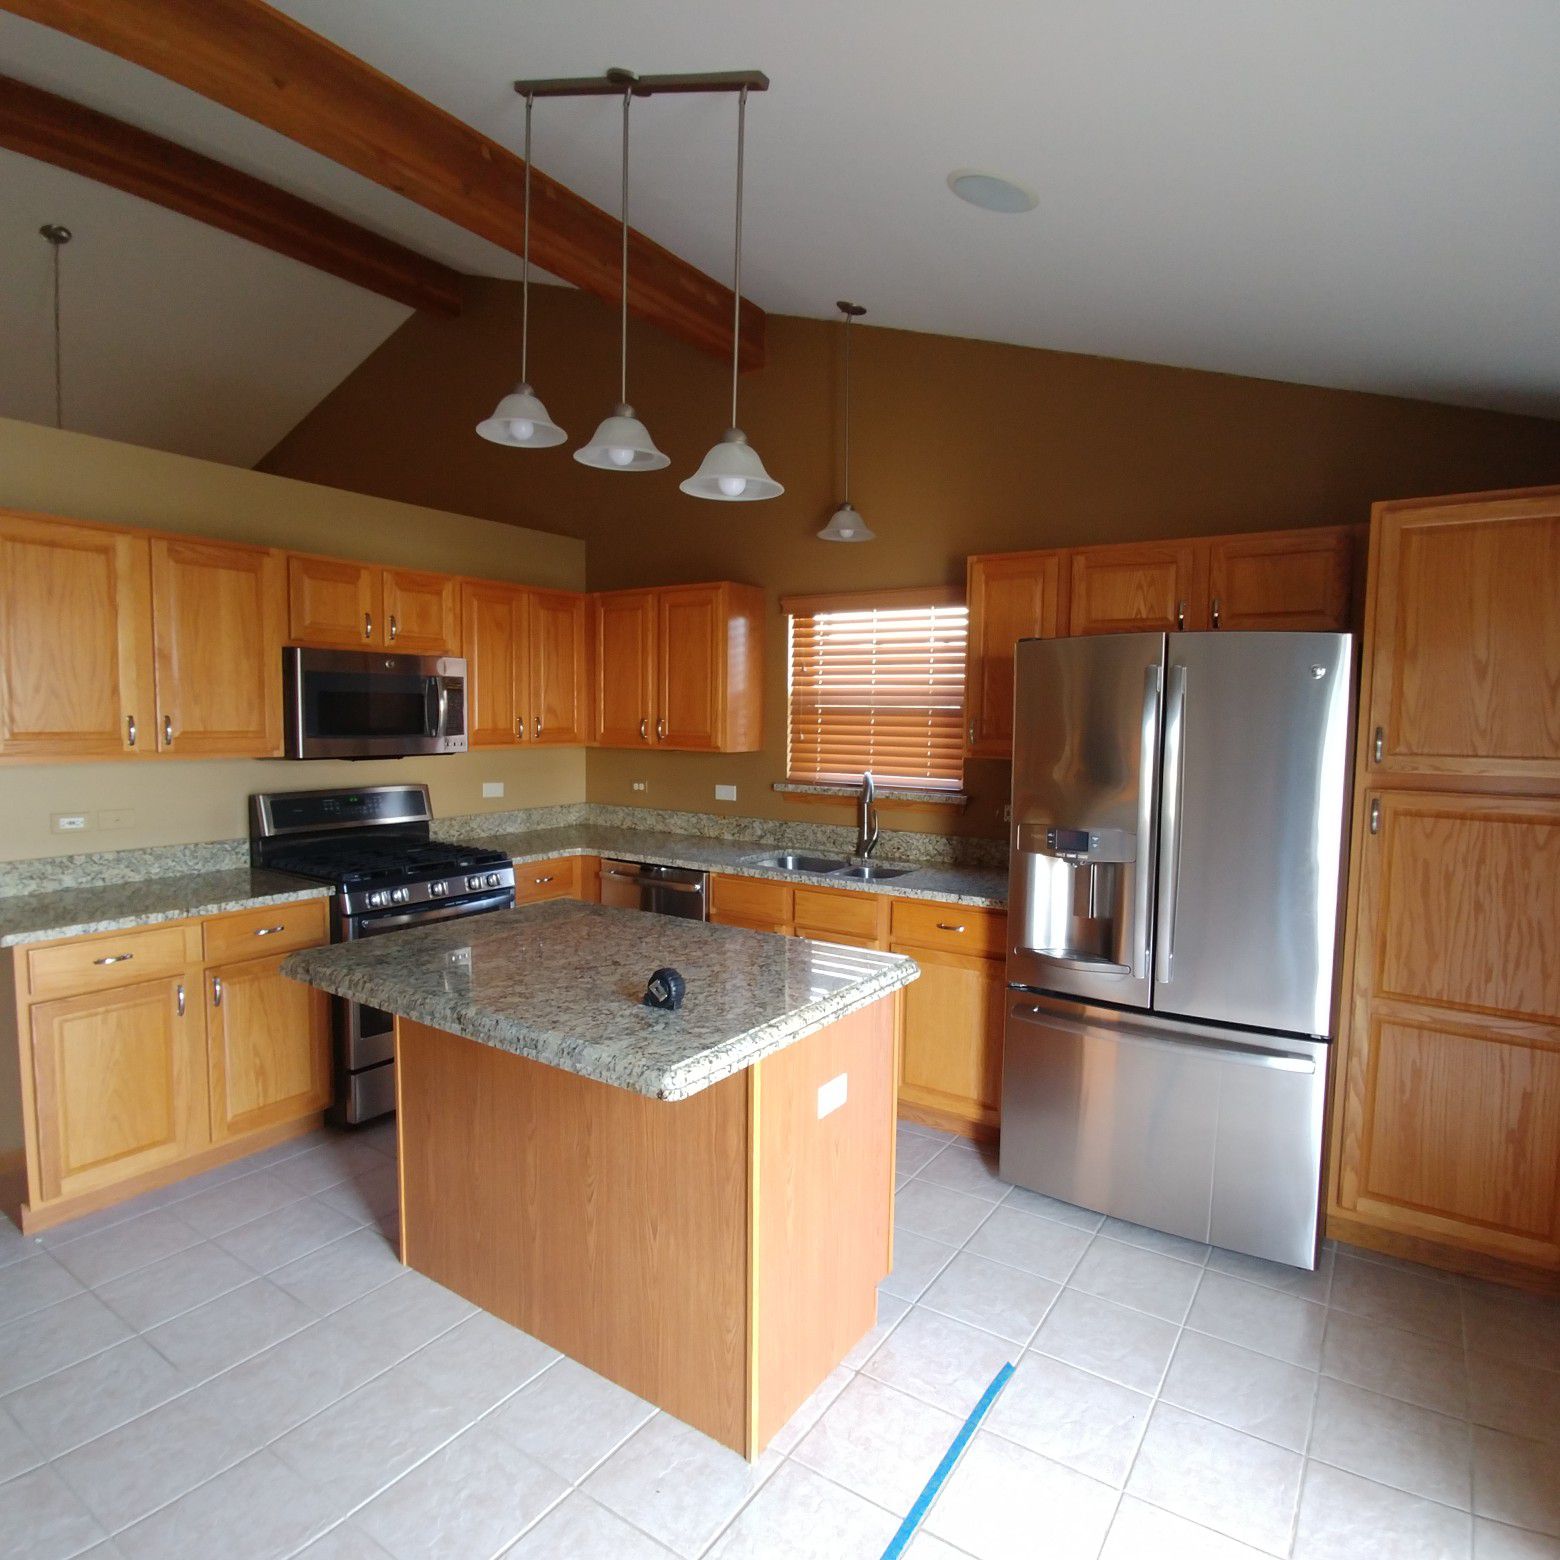 Kitchen Cabinets and Granite counters